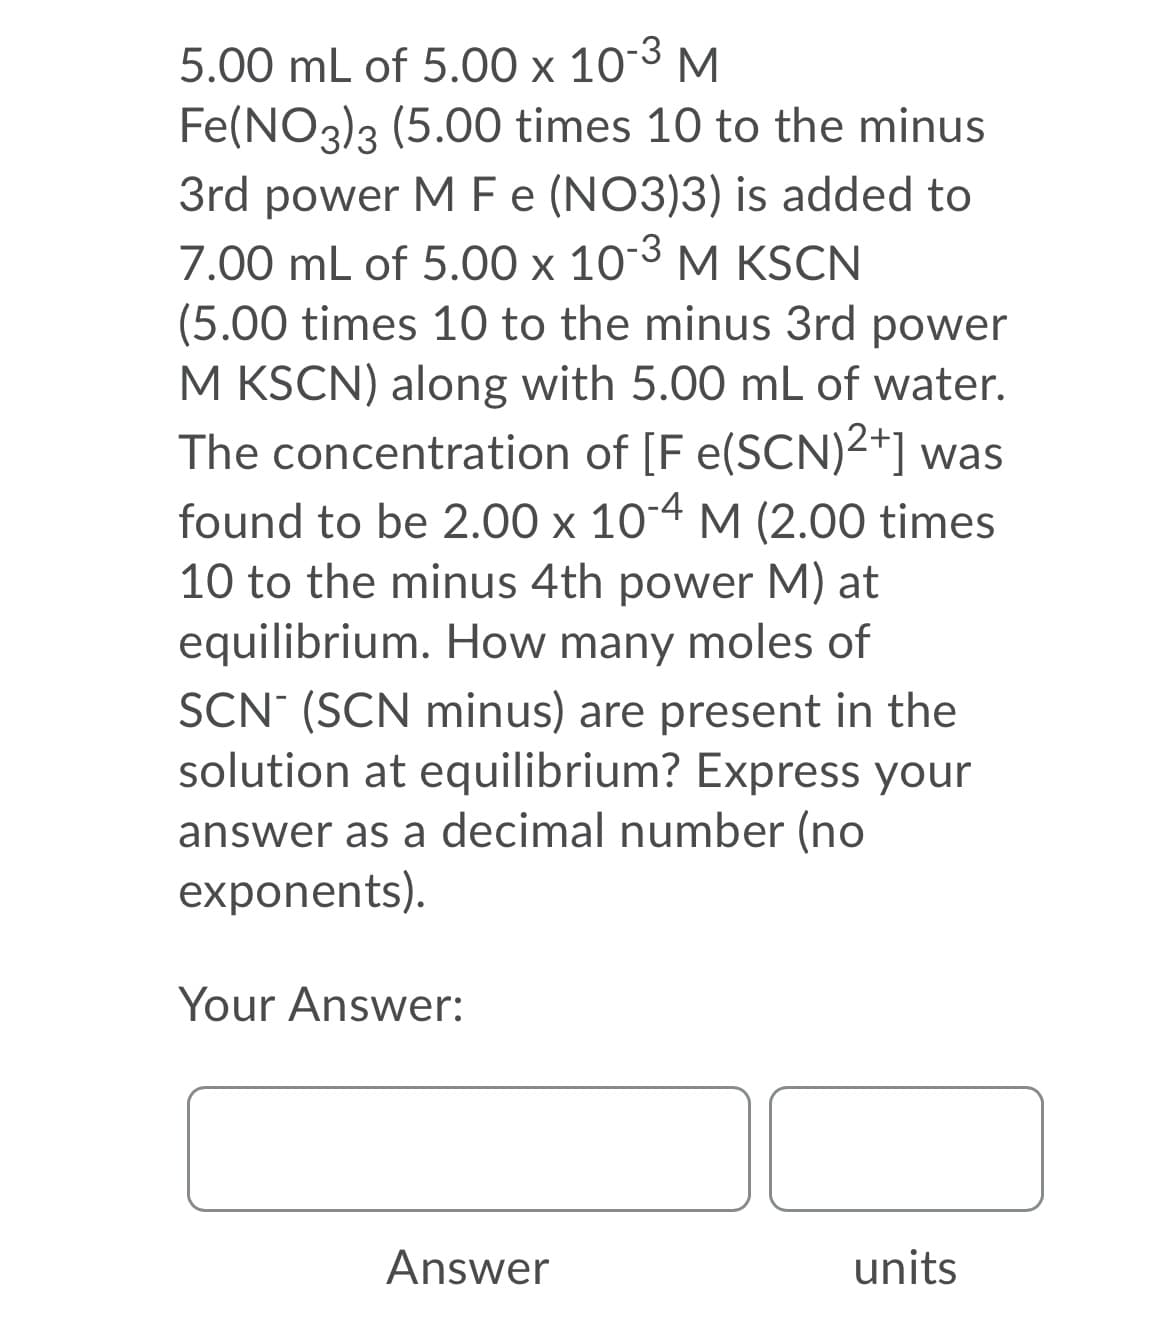 5.00 mL of 5.00 x 103 M
Fe(NO3)3 (5.00 times 10 to the minus
3rd power MF (NO3)3) is added to
7.00 mL of 5.00 x 103 M KSCN
(5.00 times 10 to the minus 3rd power
M KSCN) along with 5.00 mL of water.
The concentration of [F e(SCN)2+] was
found to be 2.00 x 104 M (2.00 times
10 to the minus 4th power M) at
equilibrium. How many moles of
SCN (SCN minus) are present in the
solution at equilibrium? Express your
answer as a decimal number (no
exponents).
Your Answer:
Answer
units
